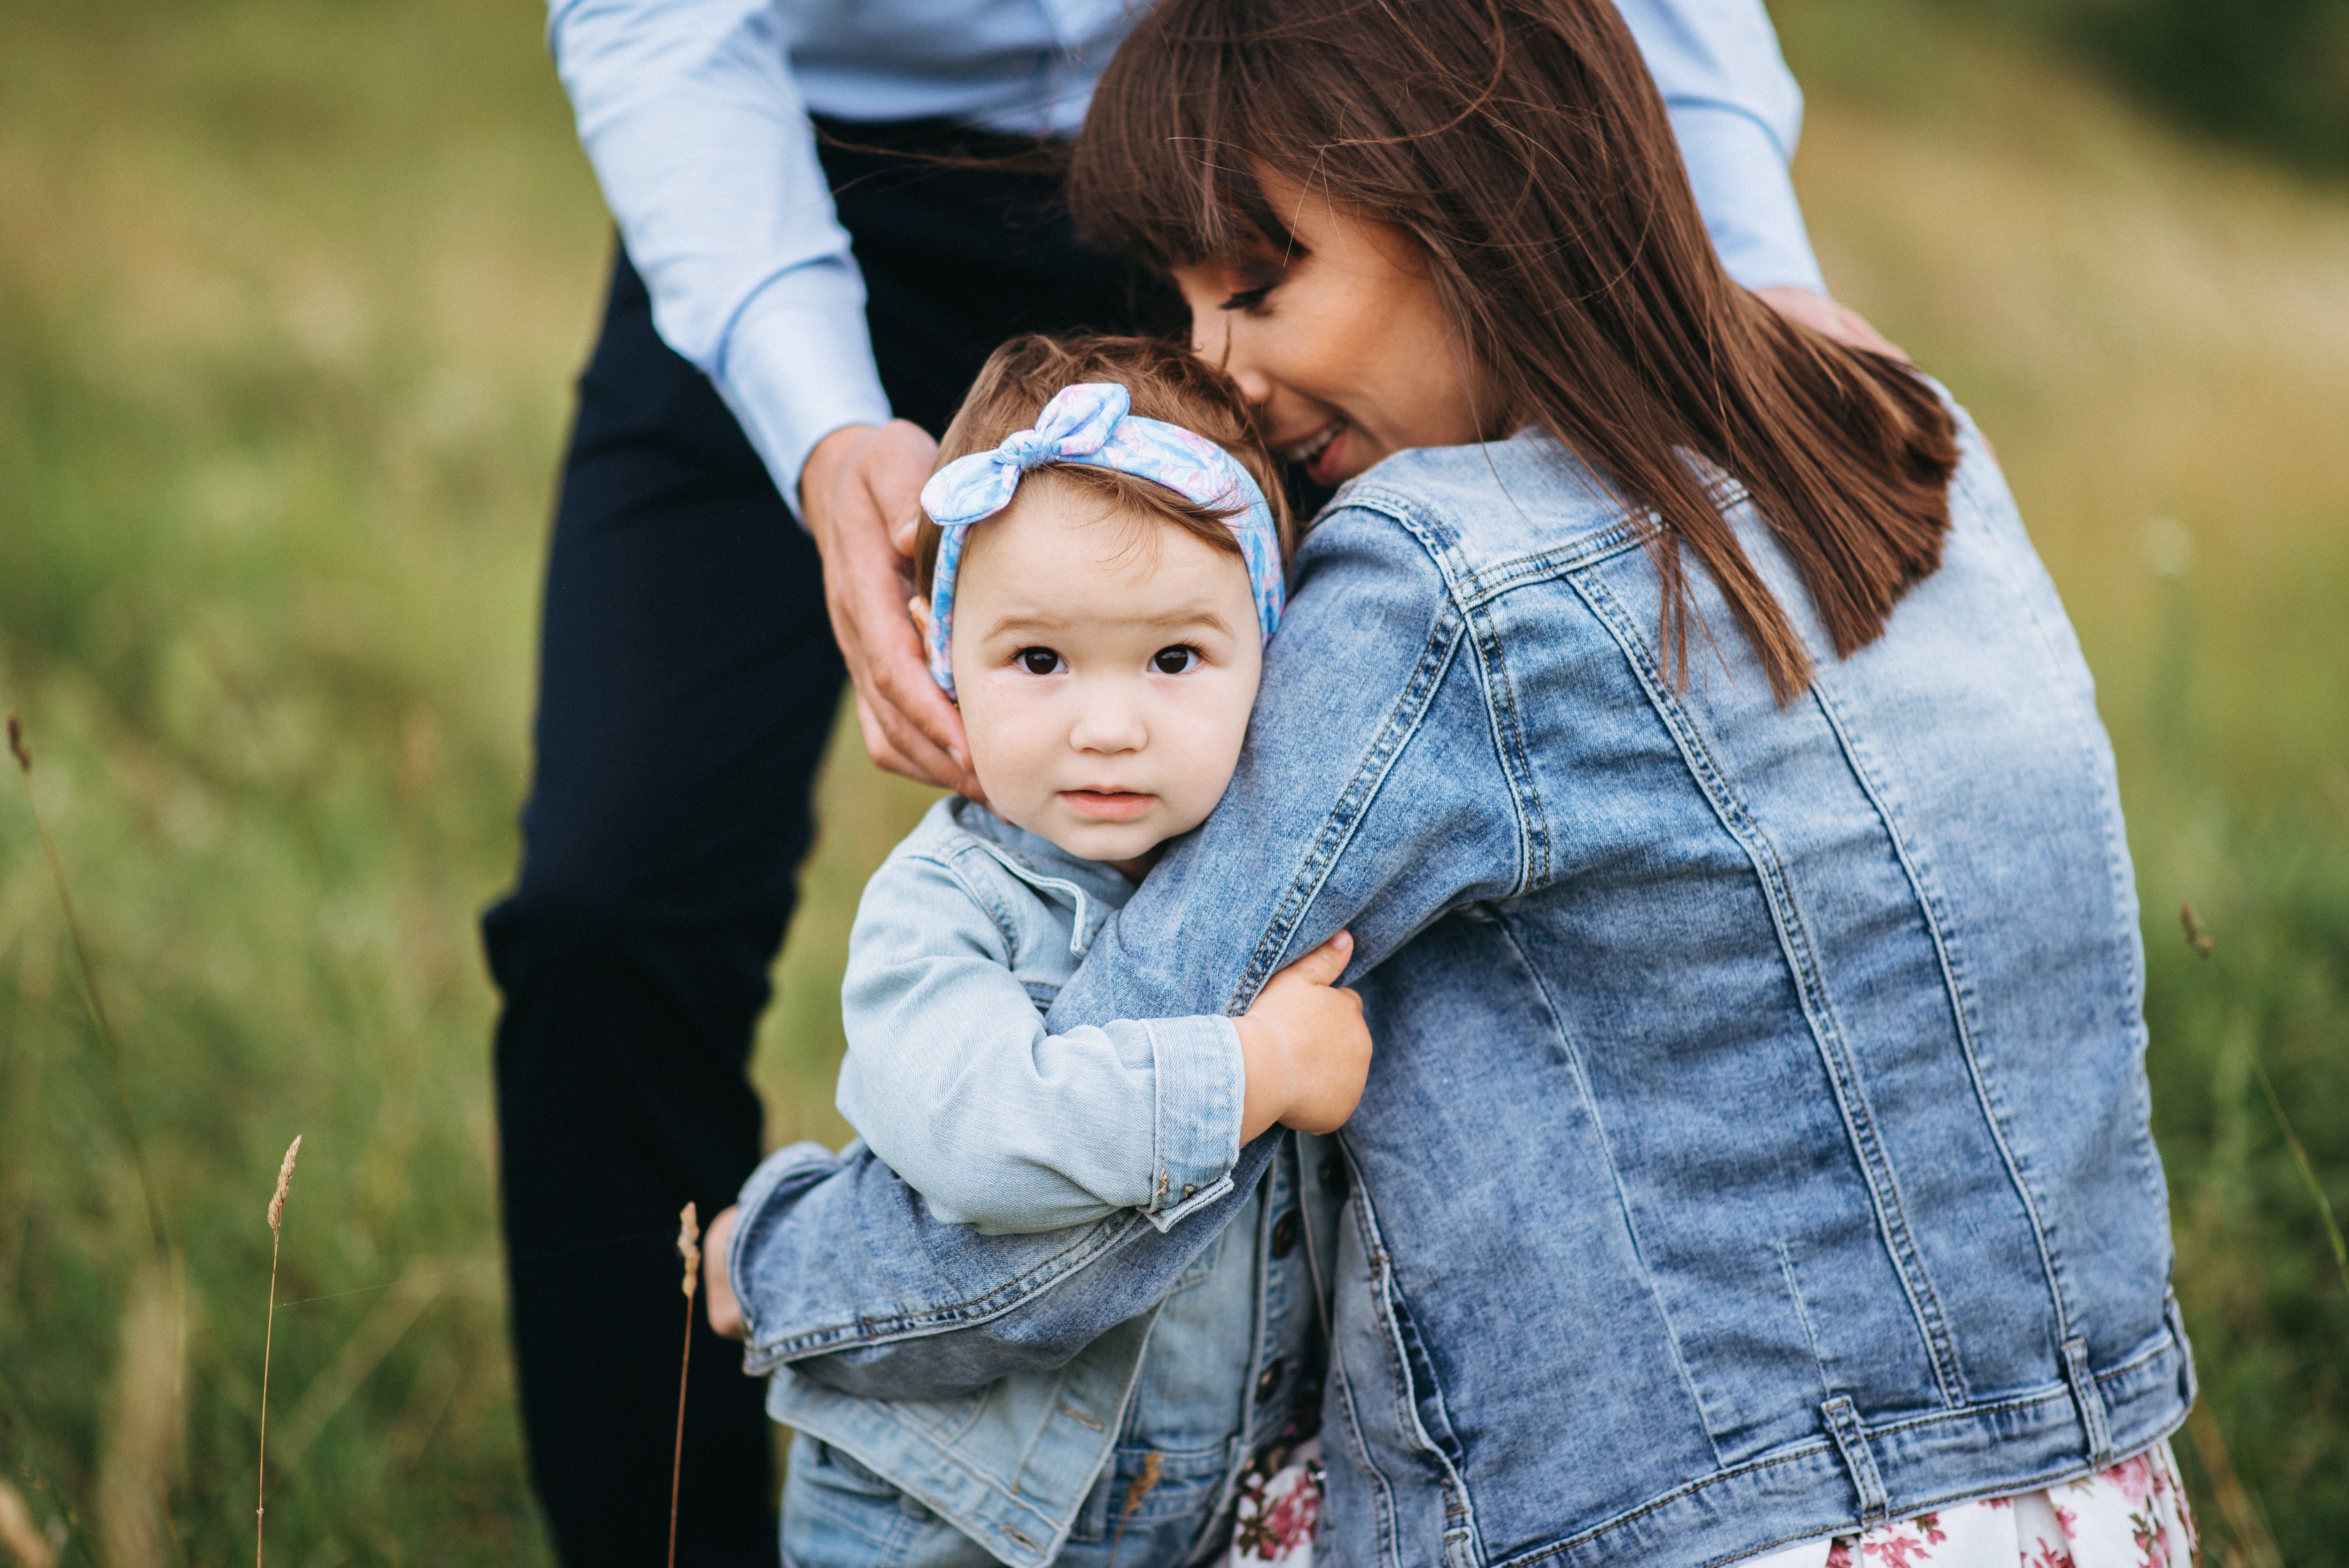 Can I Foster a Child I Know? The different types of Foster Licenses in AZ